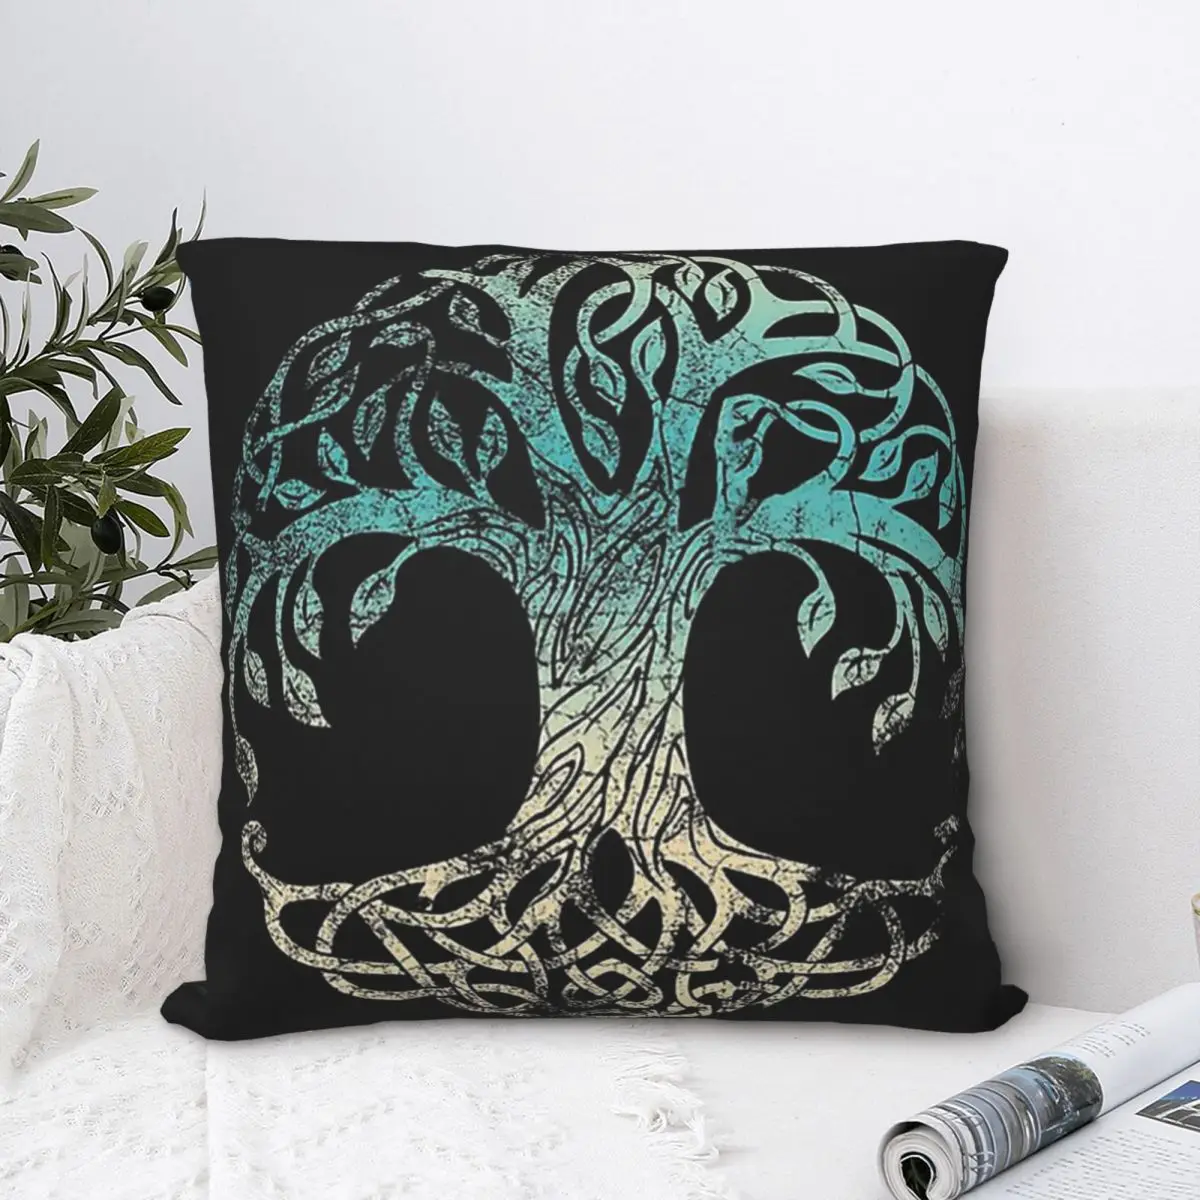 

Yggdrasil Tree Of Life Throw Pillow Case Viking Norse Mythology Backpack Cojines Covers DIY Printed Fashion For Sofa Decor